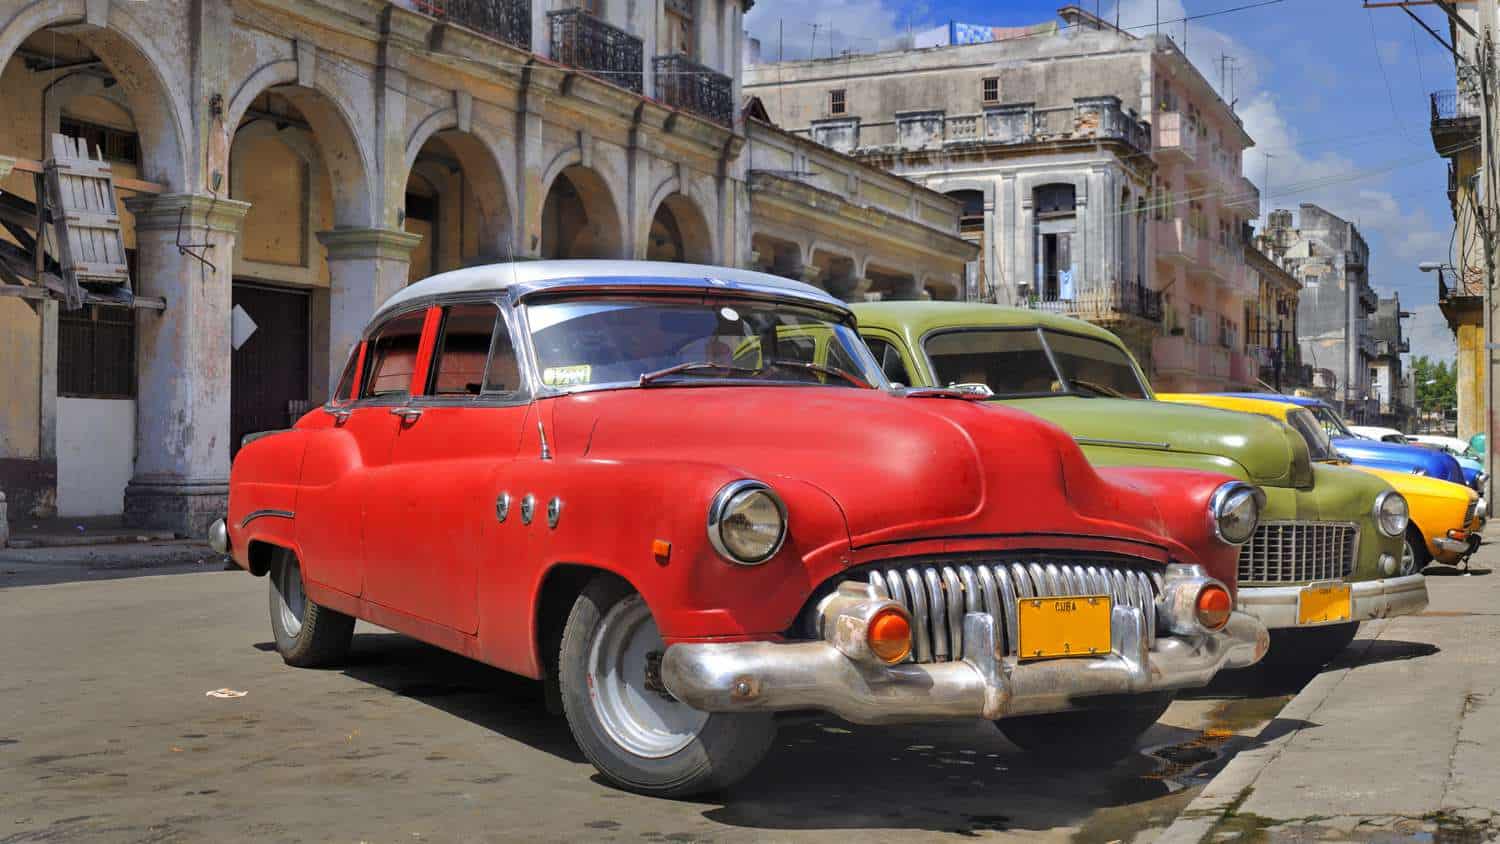 Road Scholar Offers Its First Voyage from Miami to Cuba in Over 50